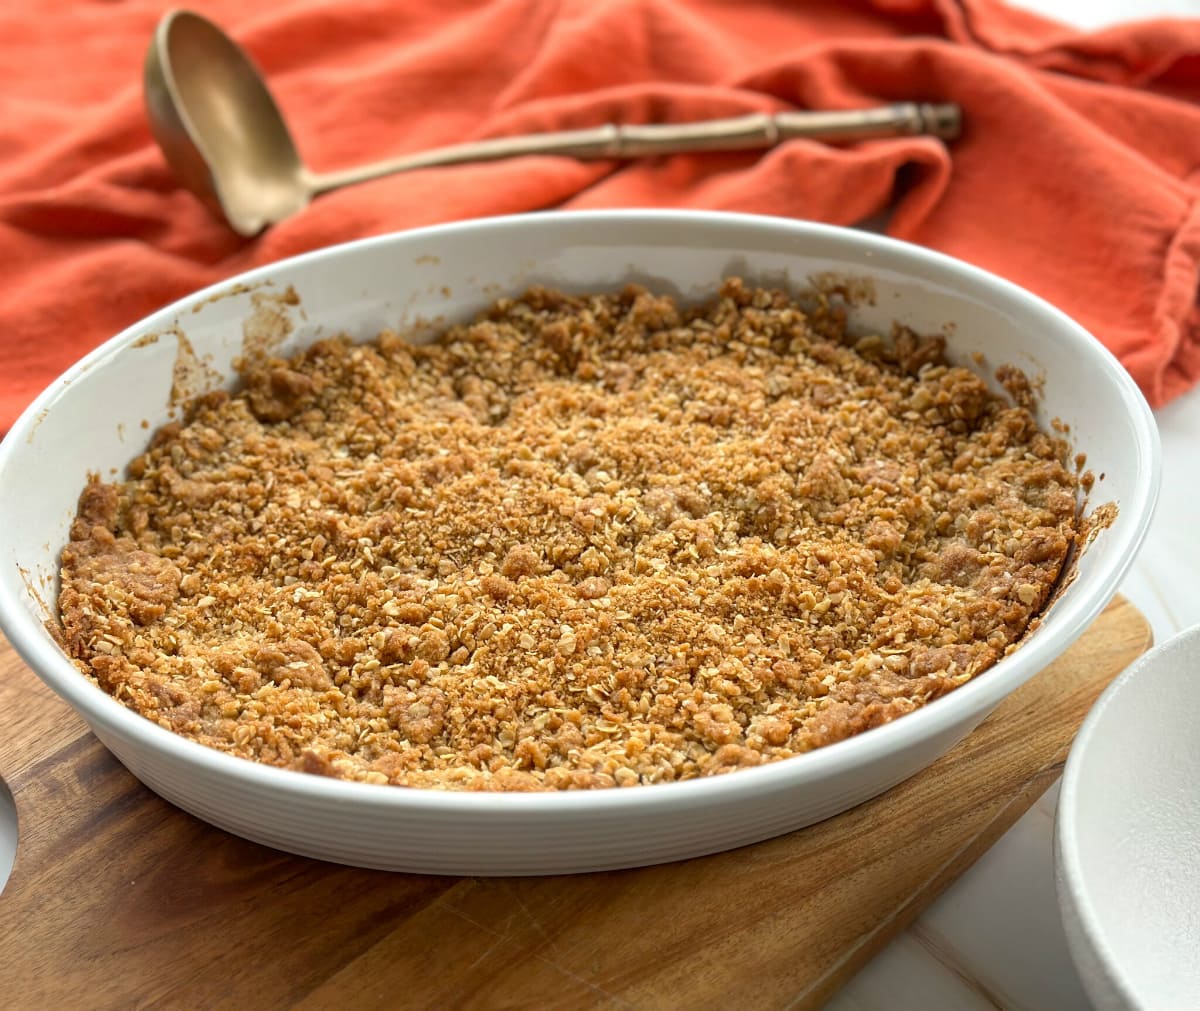 Apple Oat Crumble Crisp in a white dish with an orange cloth and a brass ladle